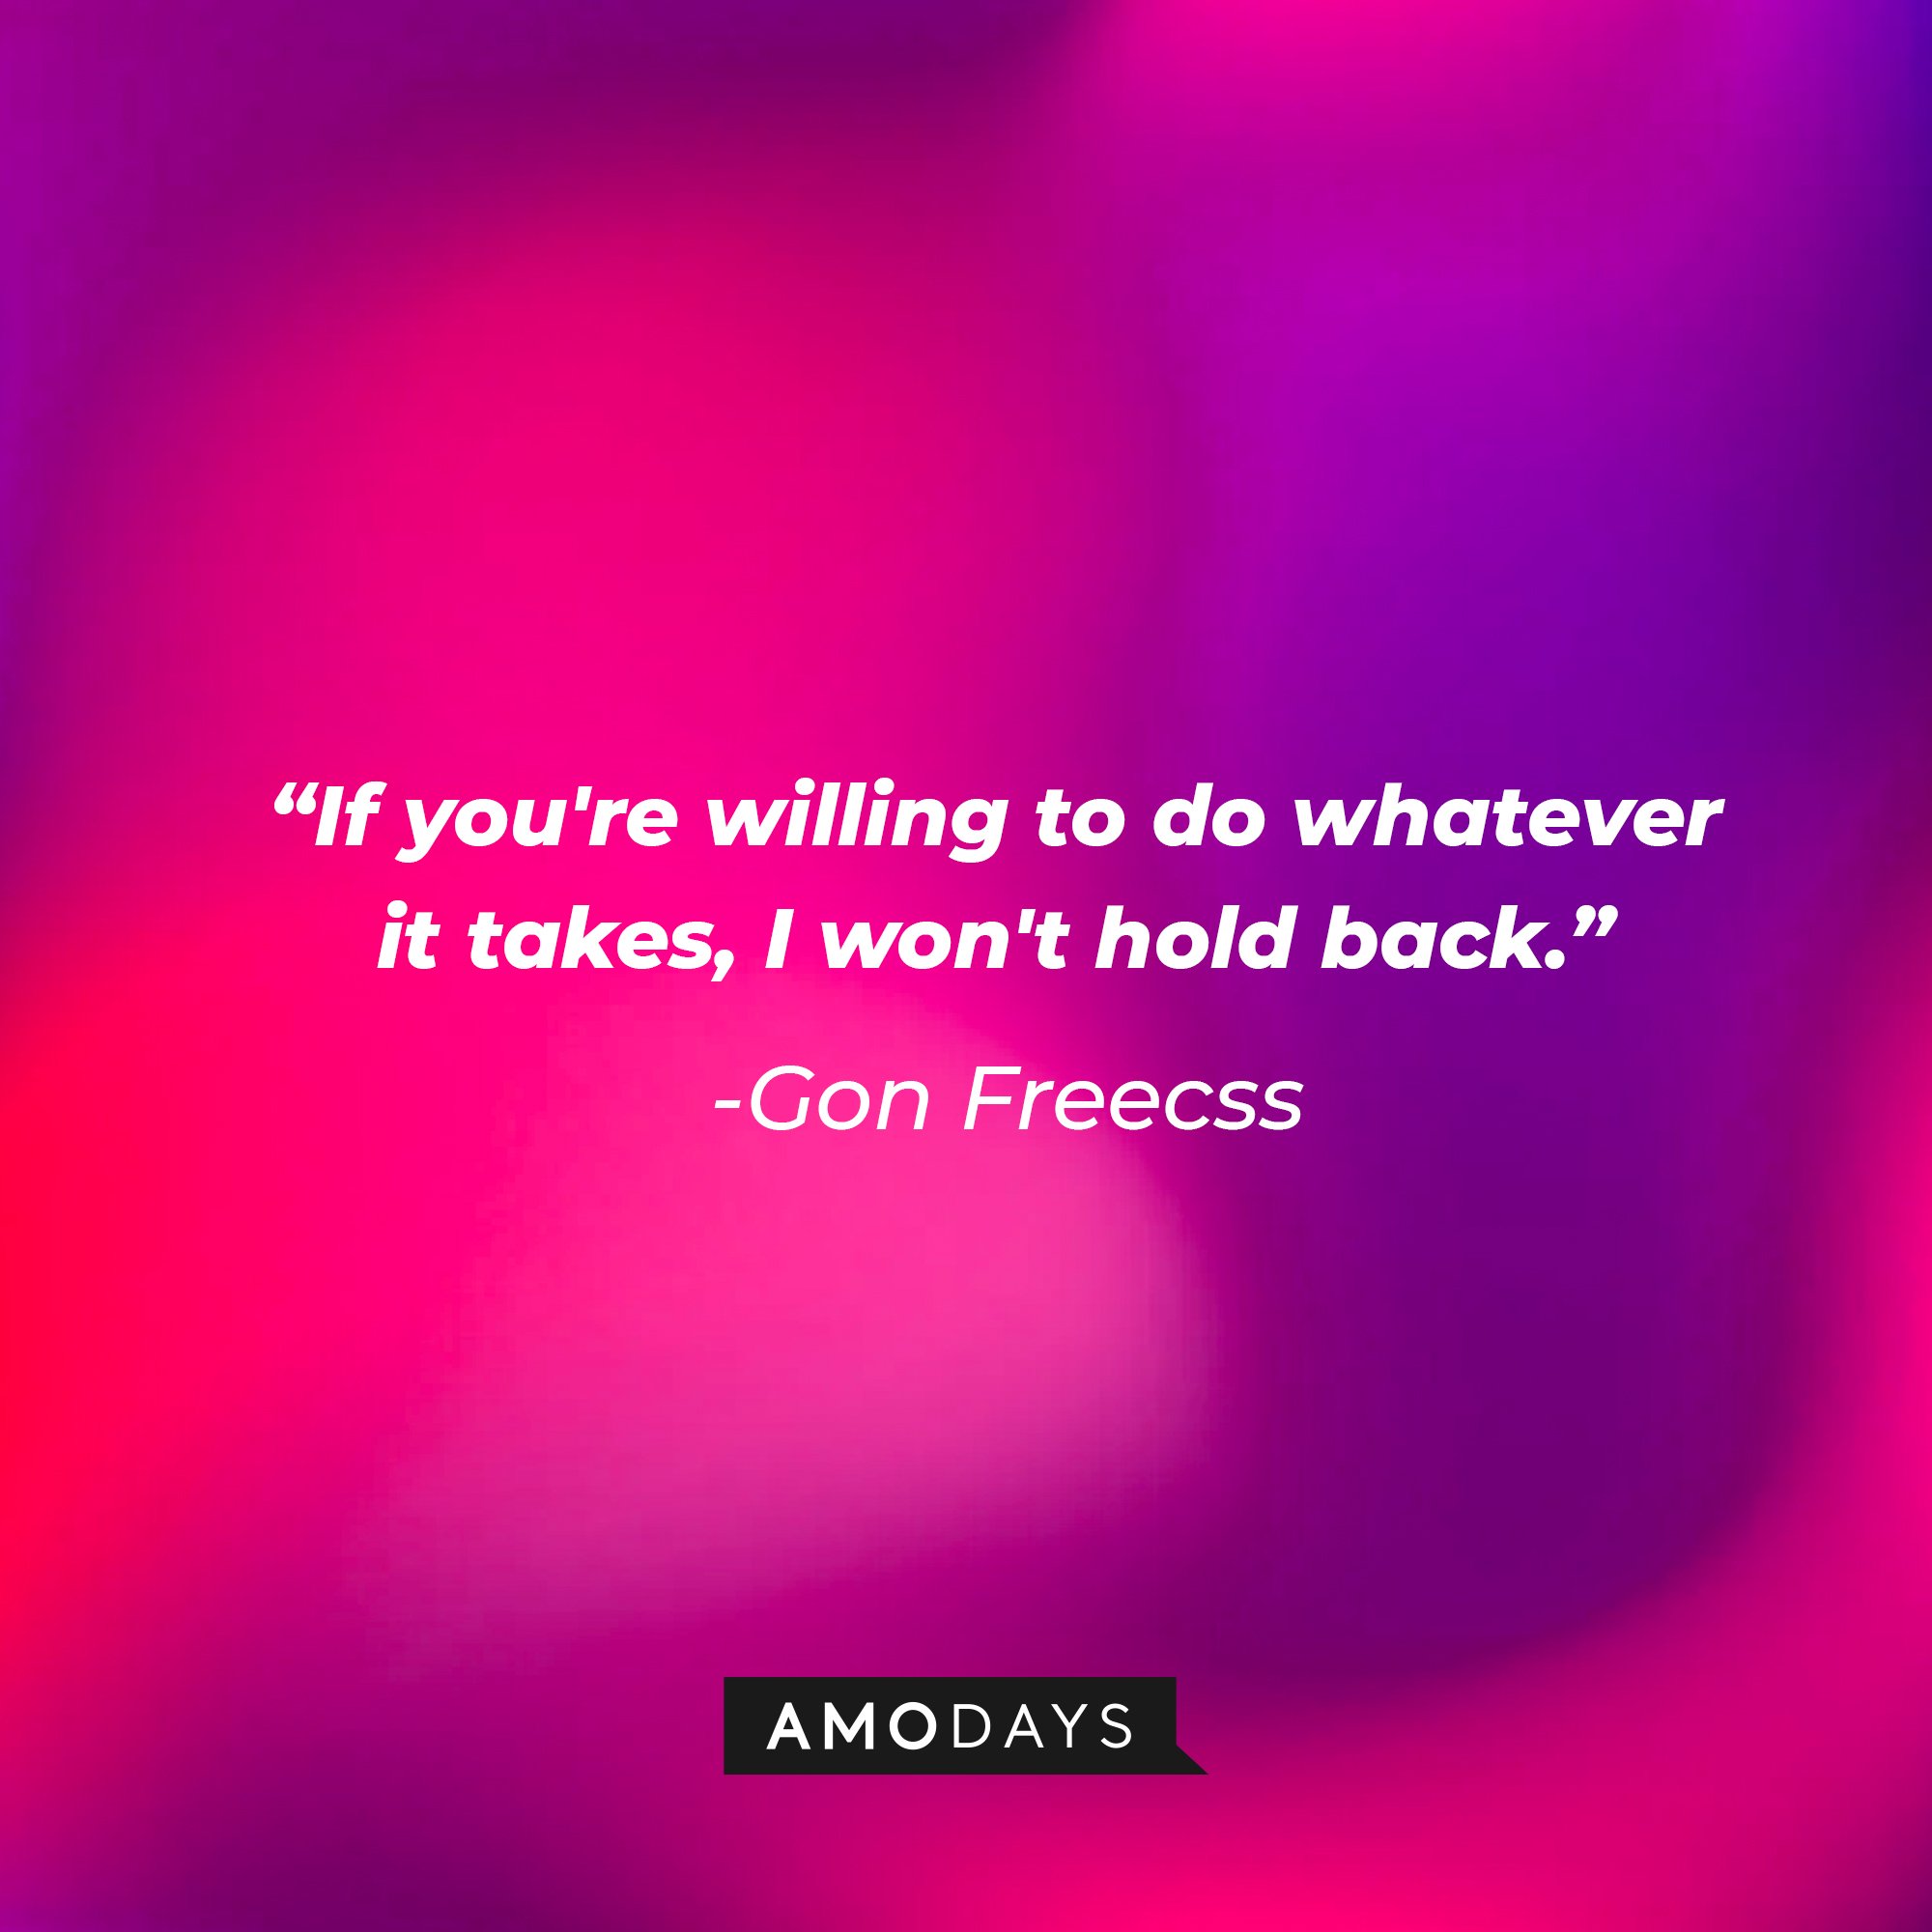 Gon Freecss' quote: "If you're willing to do whatever it takes, I won't hold back." | Image: AmoDays 